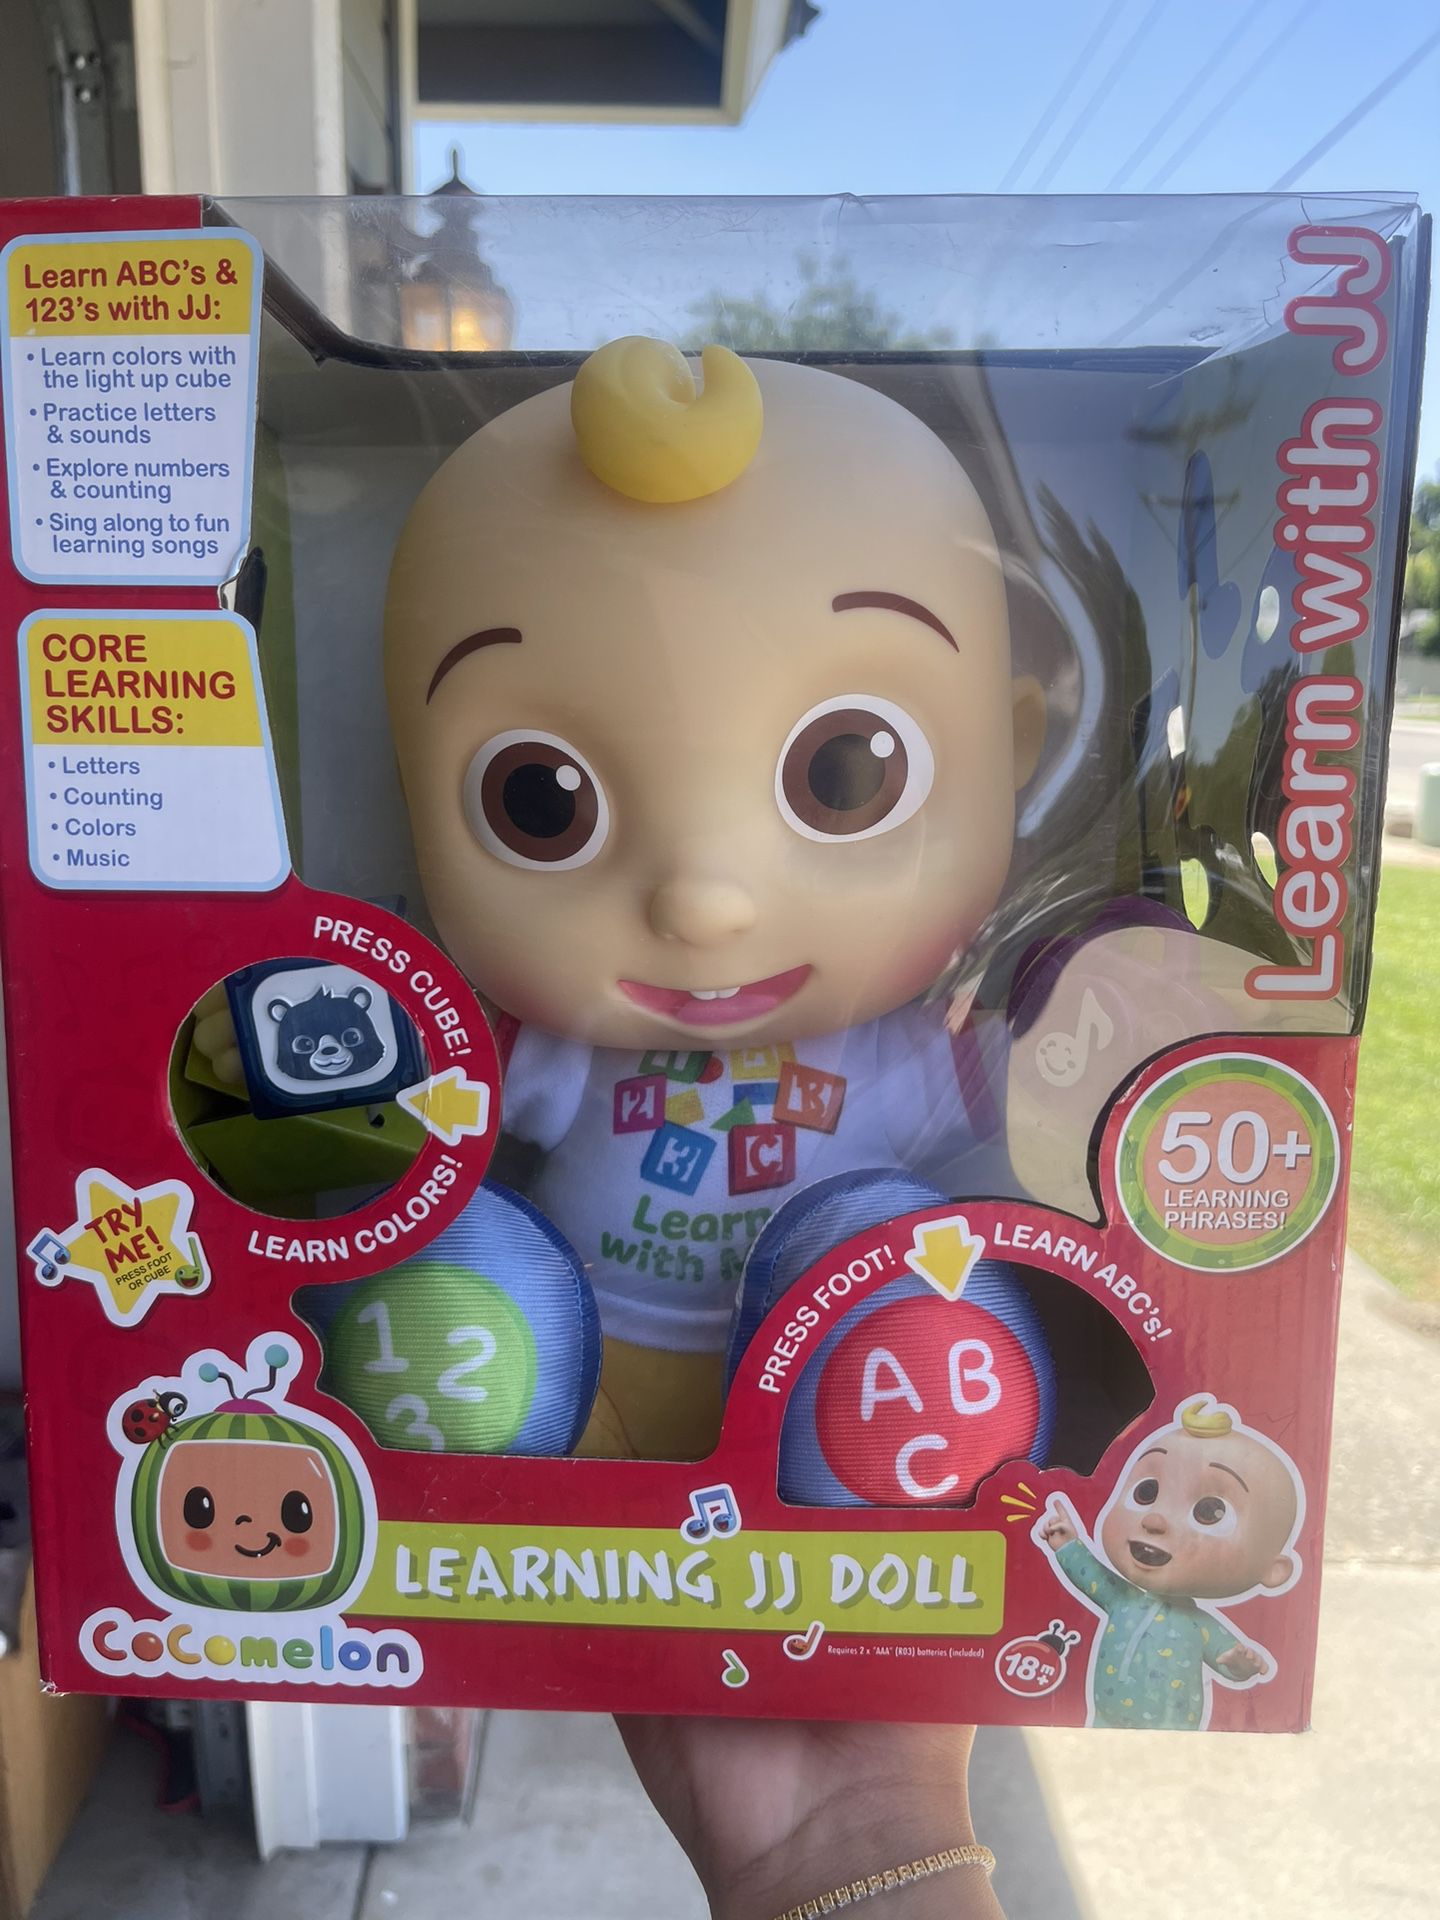 Cocomelon Learning Doll